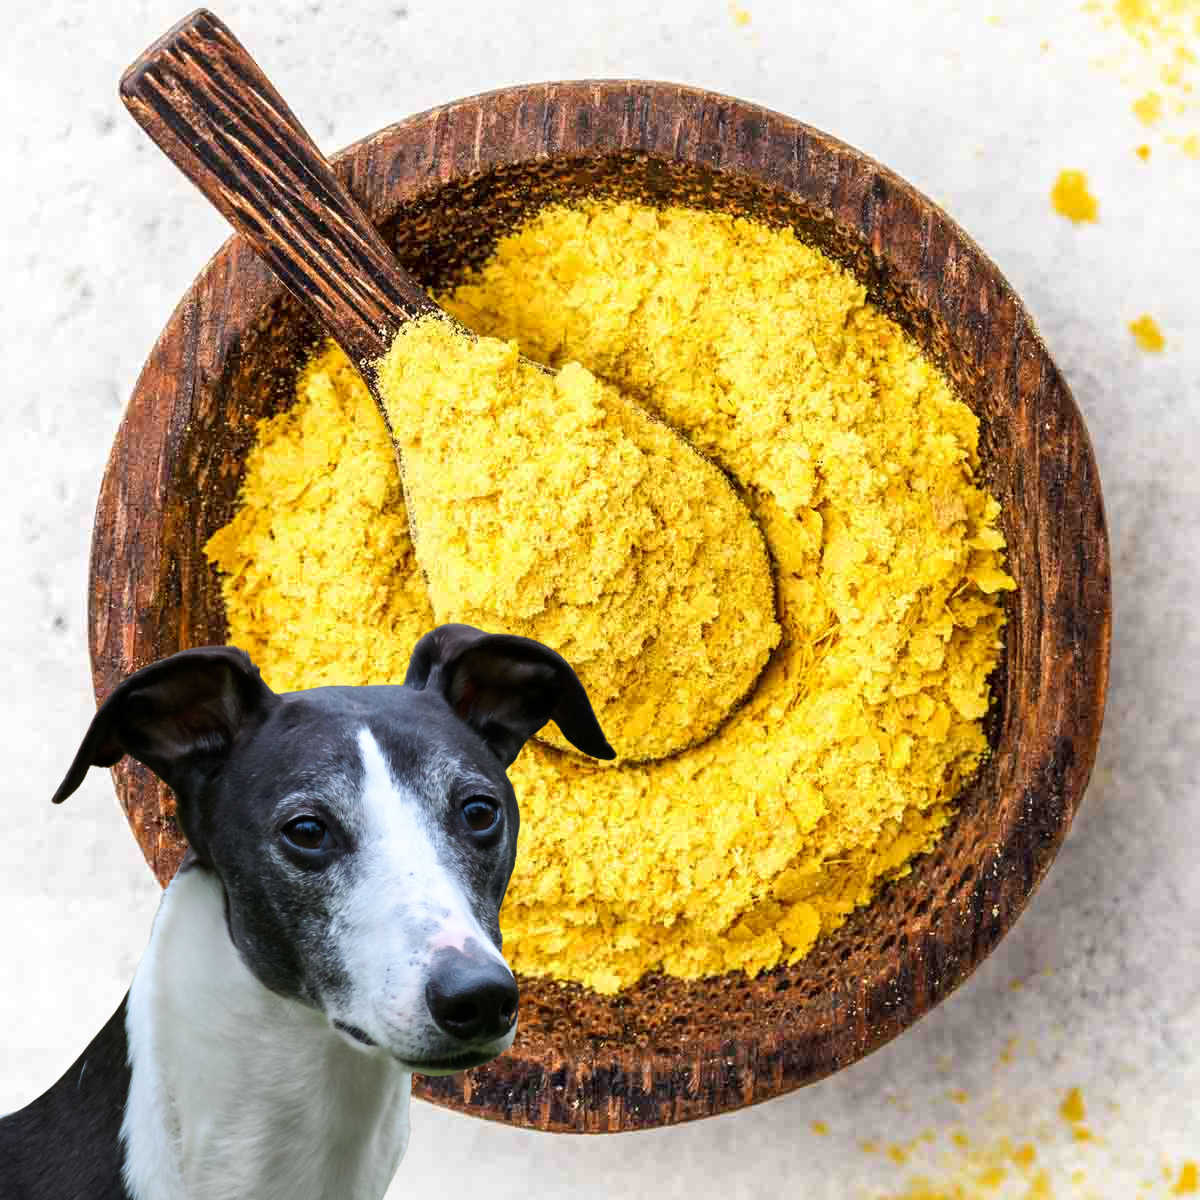 Dog in front of a bowl of nutritional yeast.